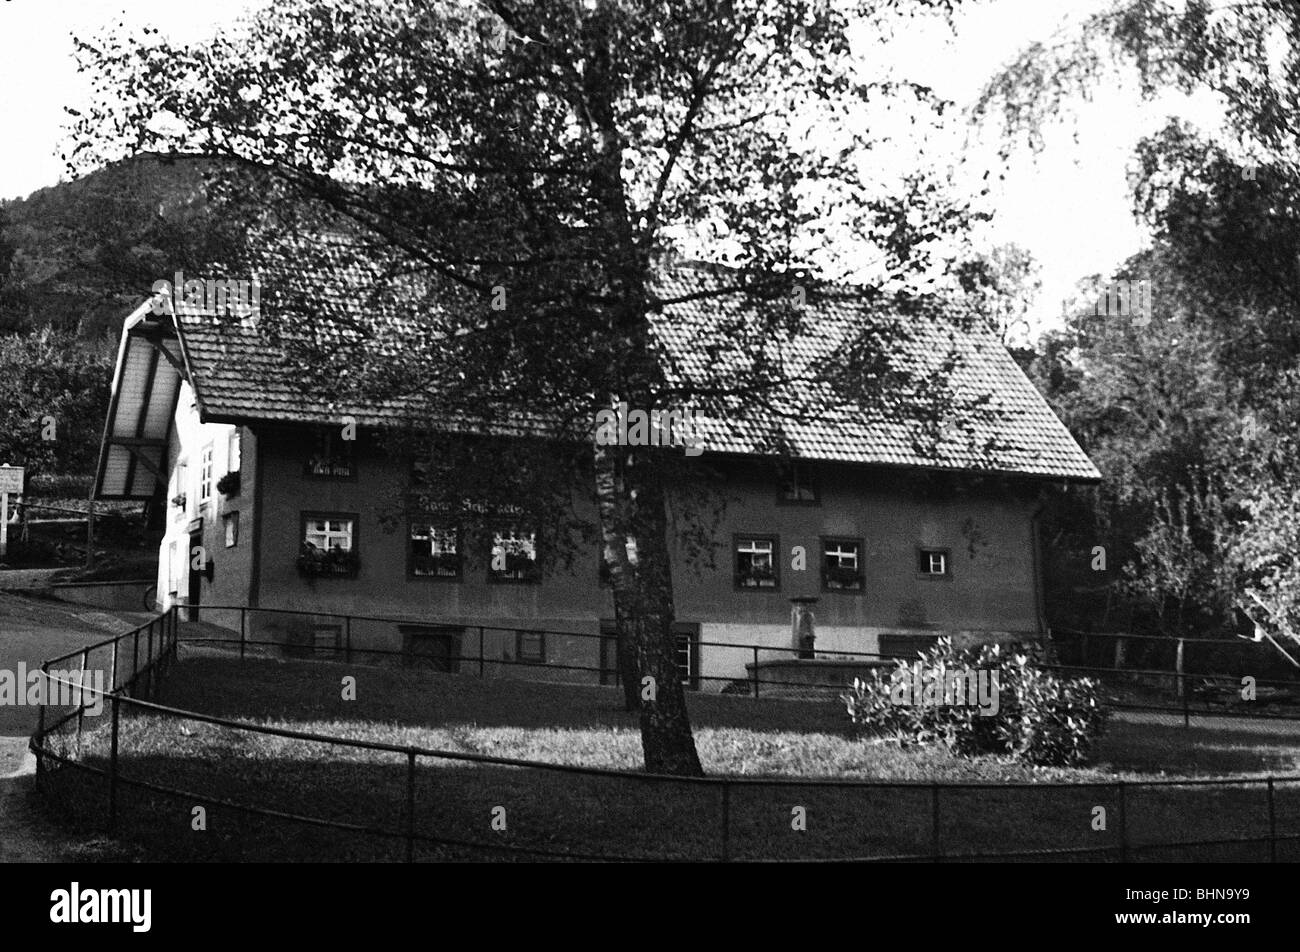 Schlageter, Albert Leo, 12.8.1894 - 26.5.1923, German officer, the house of his birth in Schoenau, Black Forest, Germany, 1938, Stock Photo